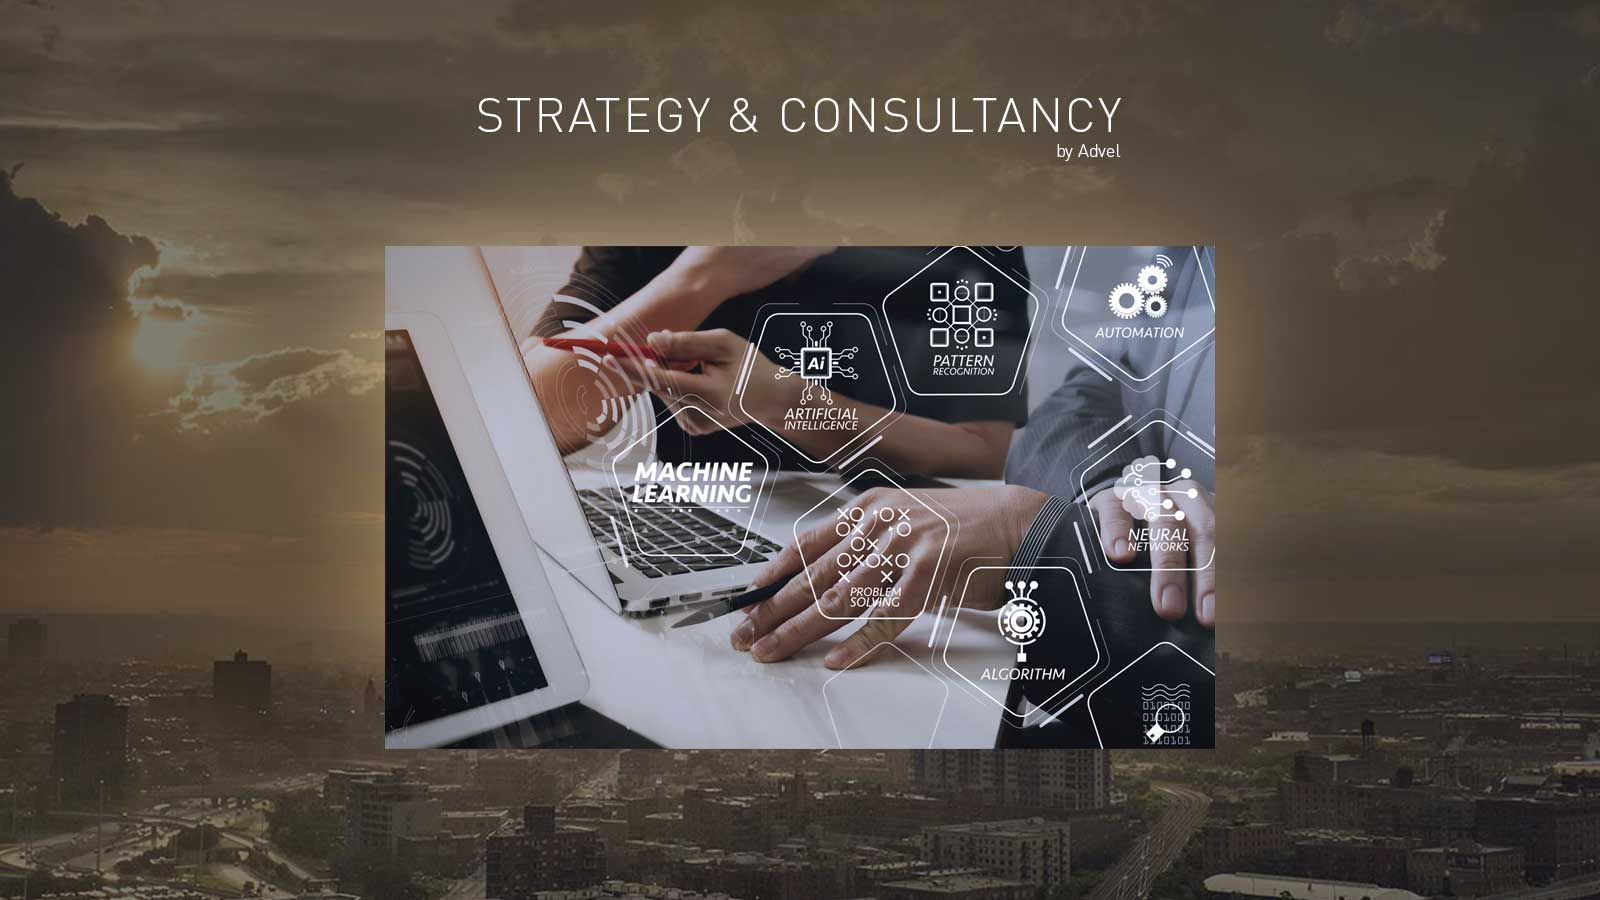 Strategy & Consultancy